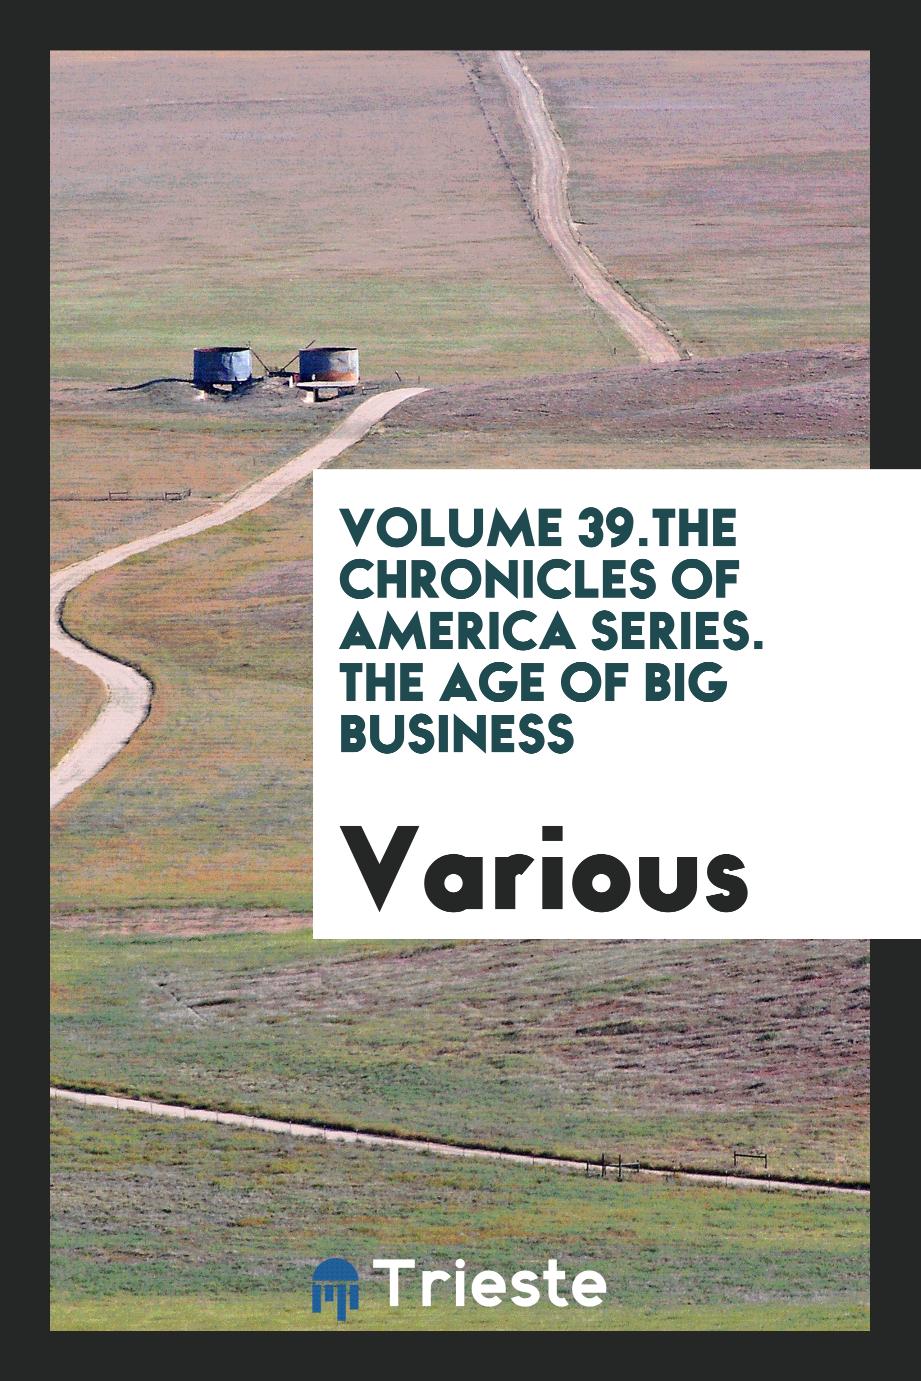 Volume 39.The Chronicles of America series. The age of big business